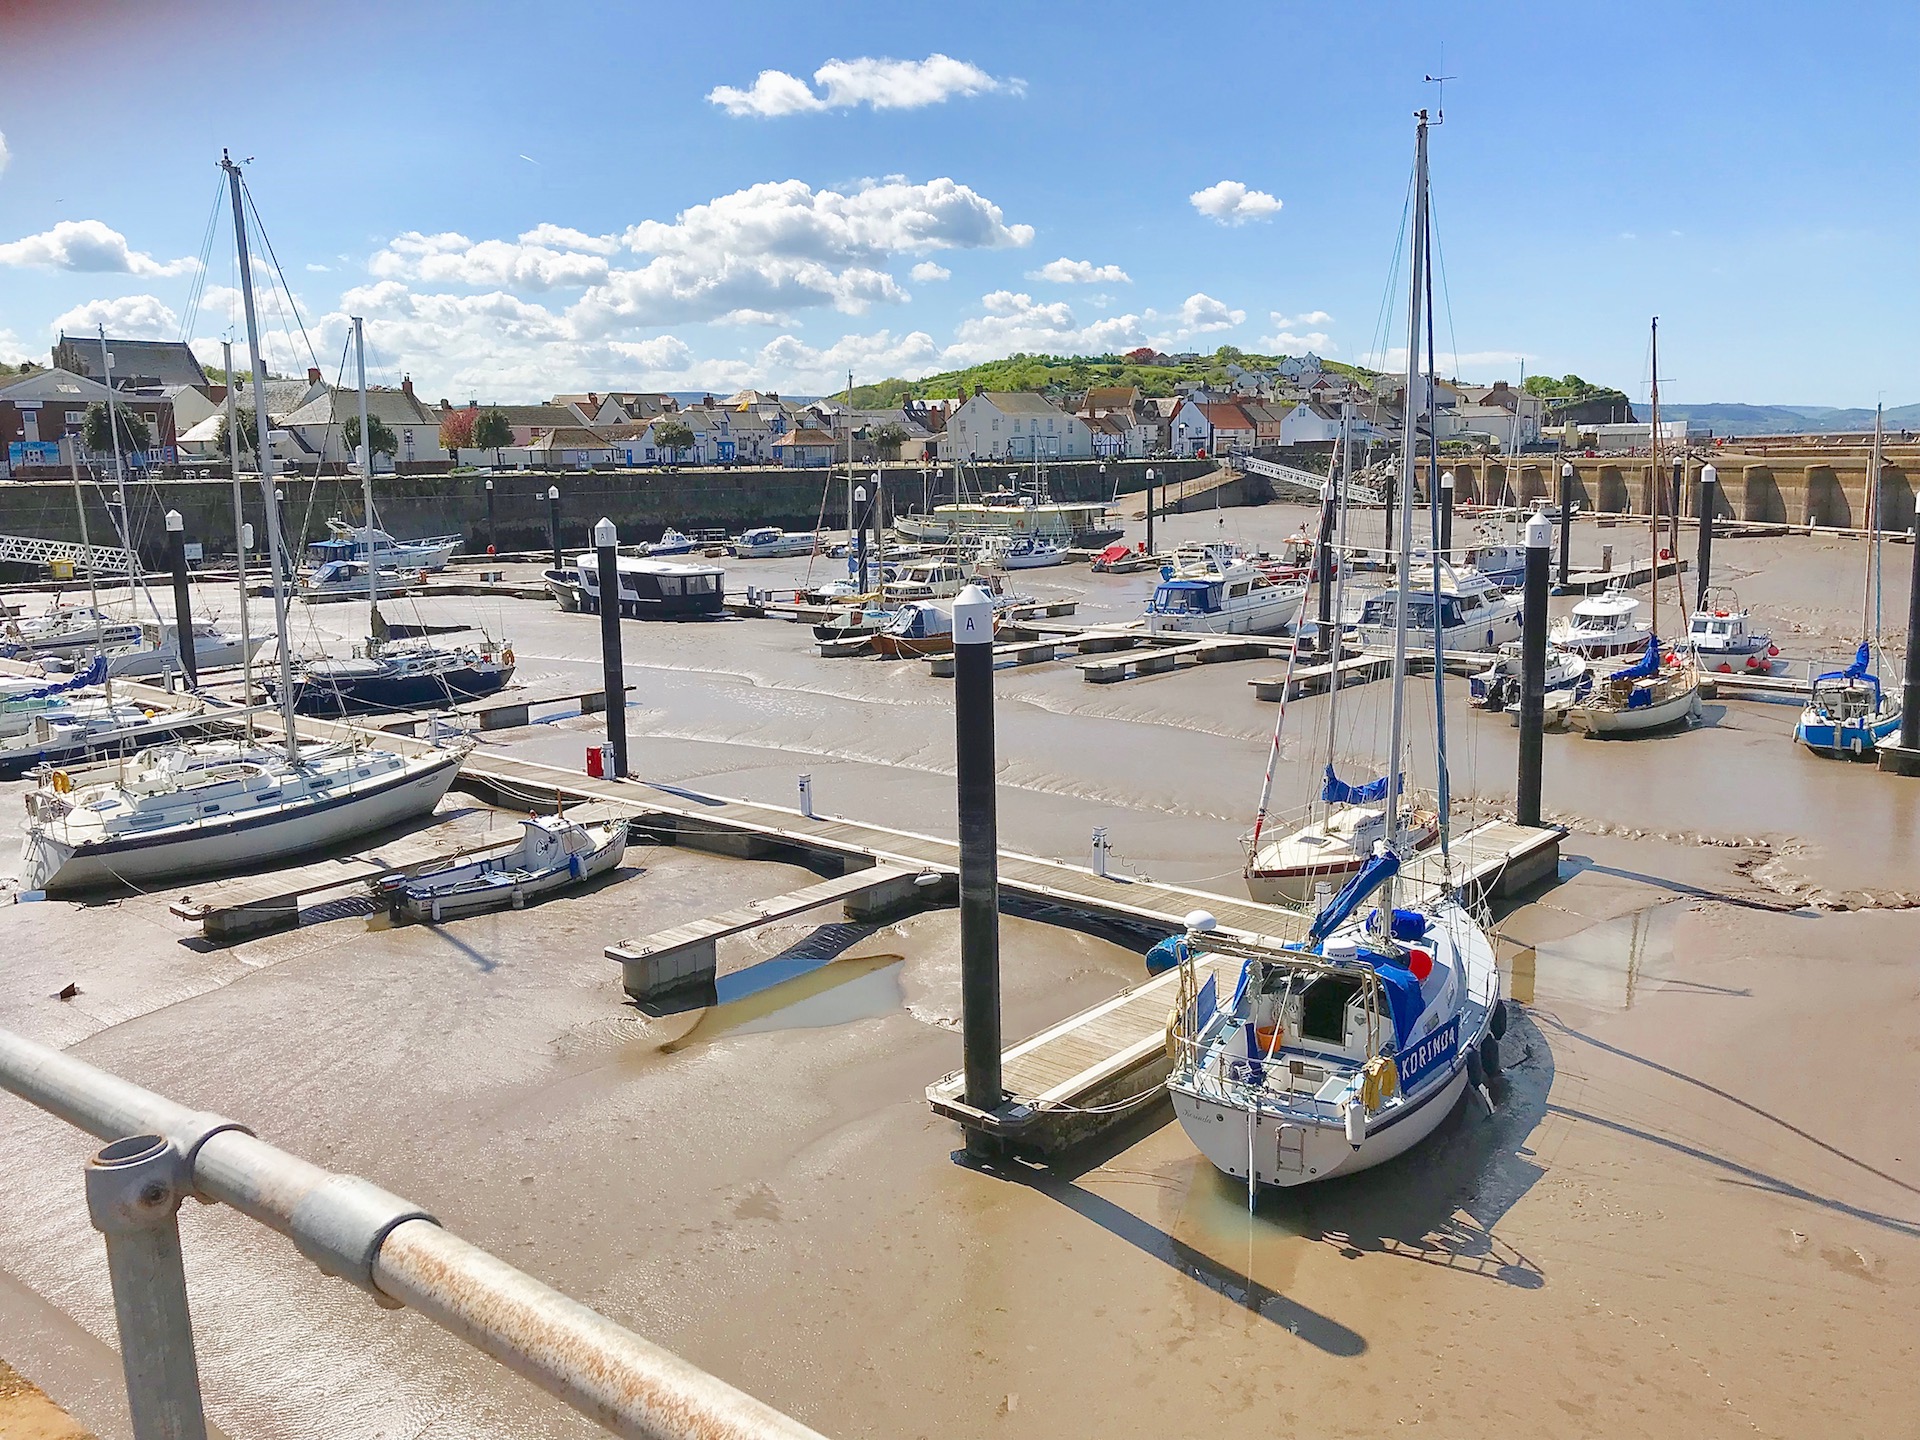 watchet harbour at low tide..Small fishing boats and yachts are settled on the sandy harbour floor.